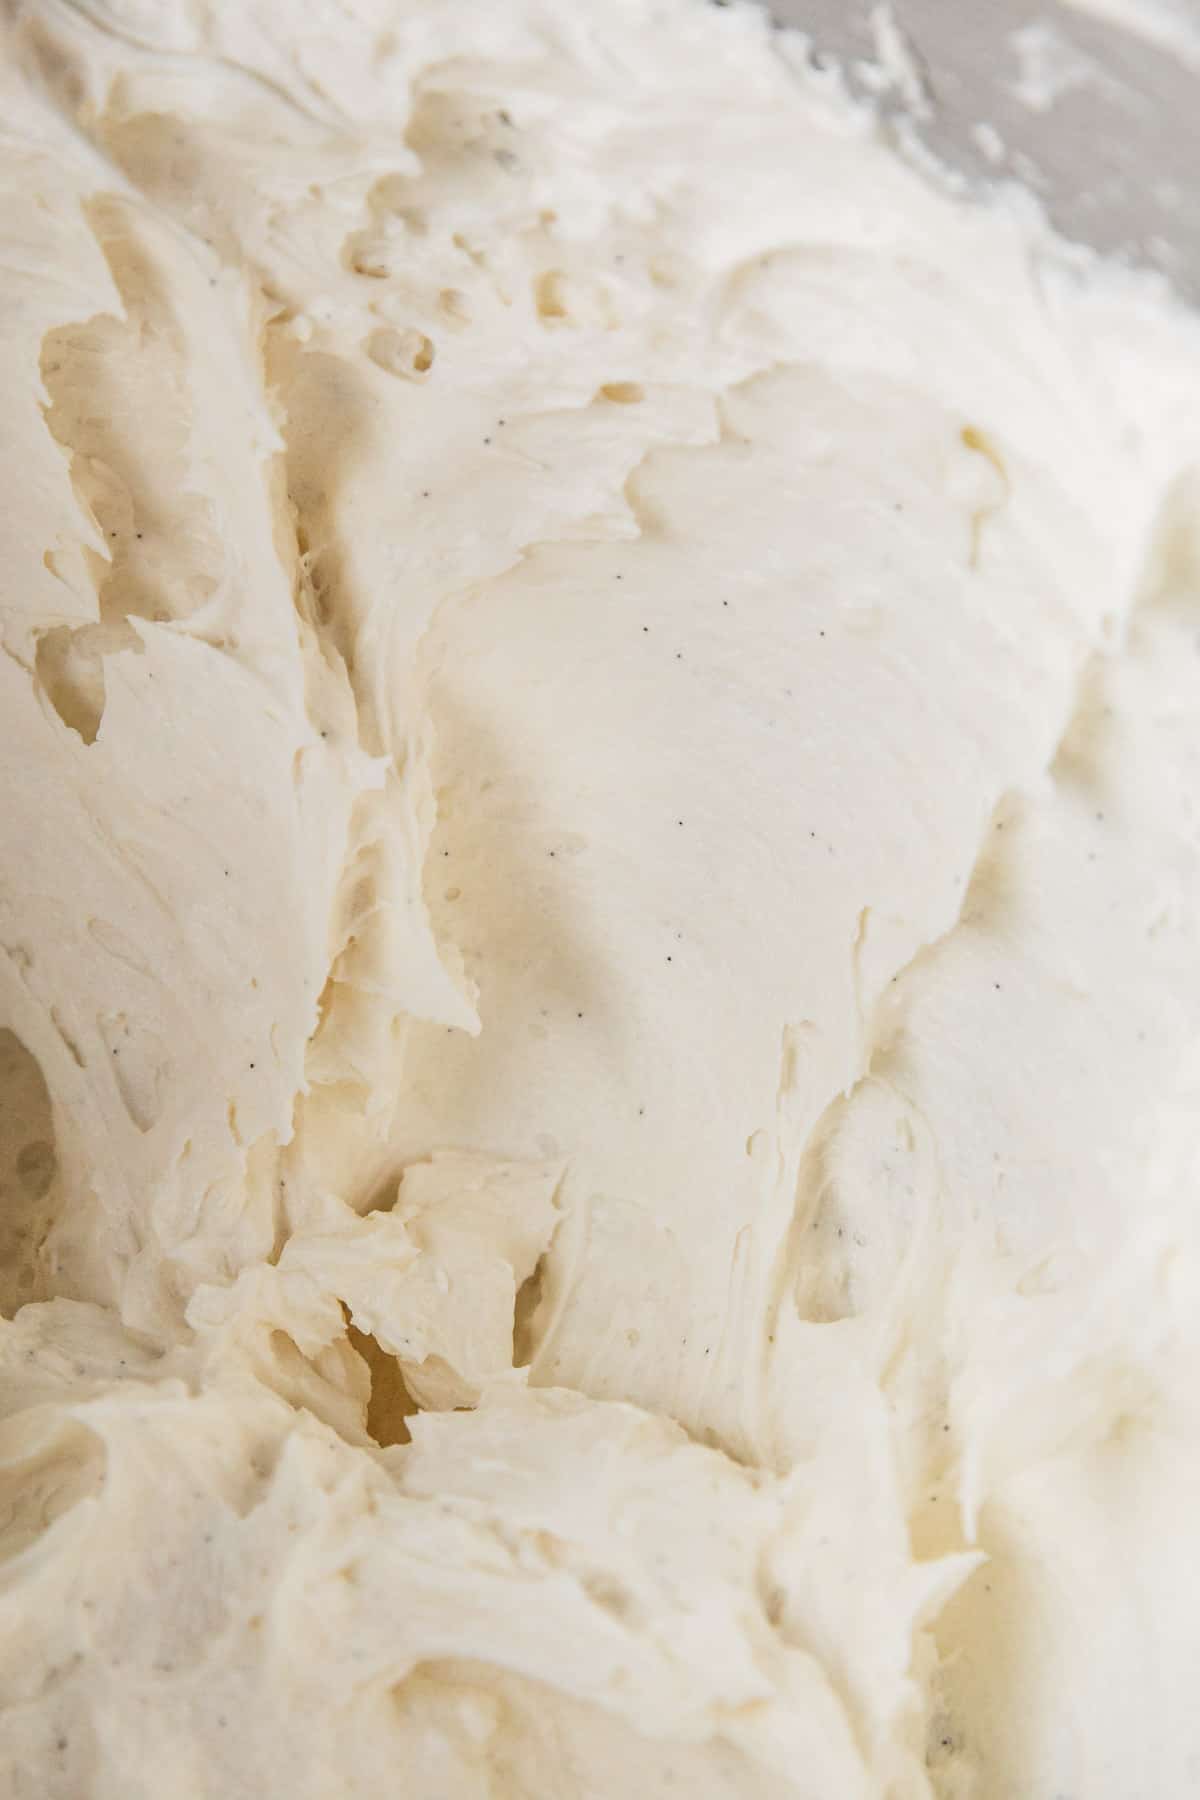 Closeup of the vegan vanilla buttercream frosting in the bowl, showing the delicate black flecks of vanilla bean throughout.